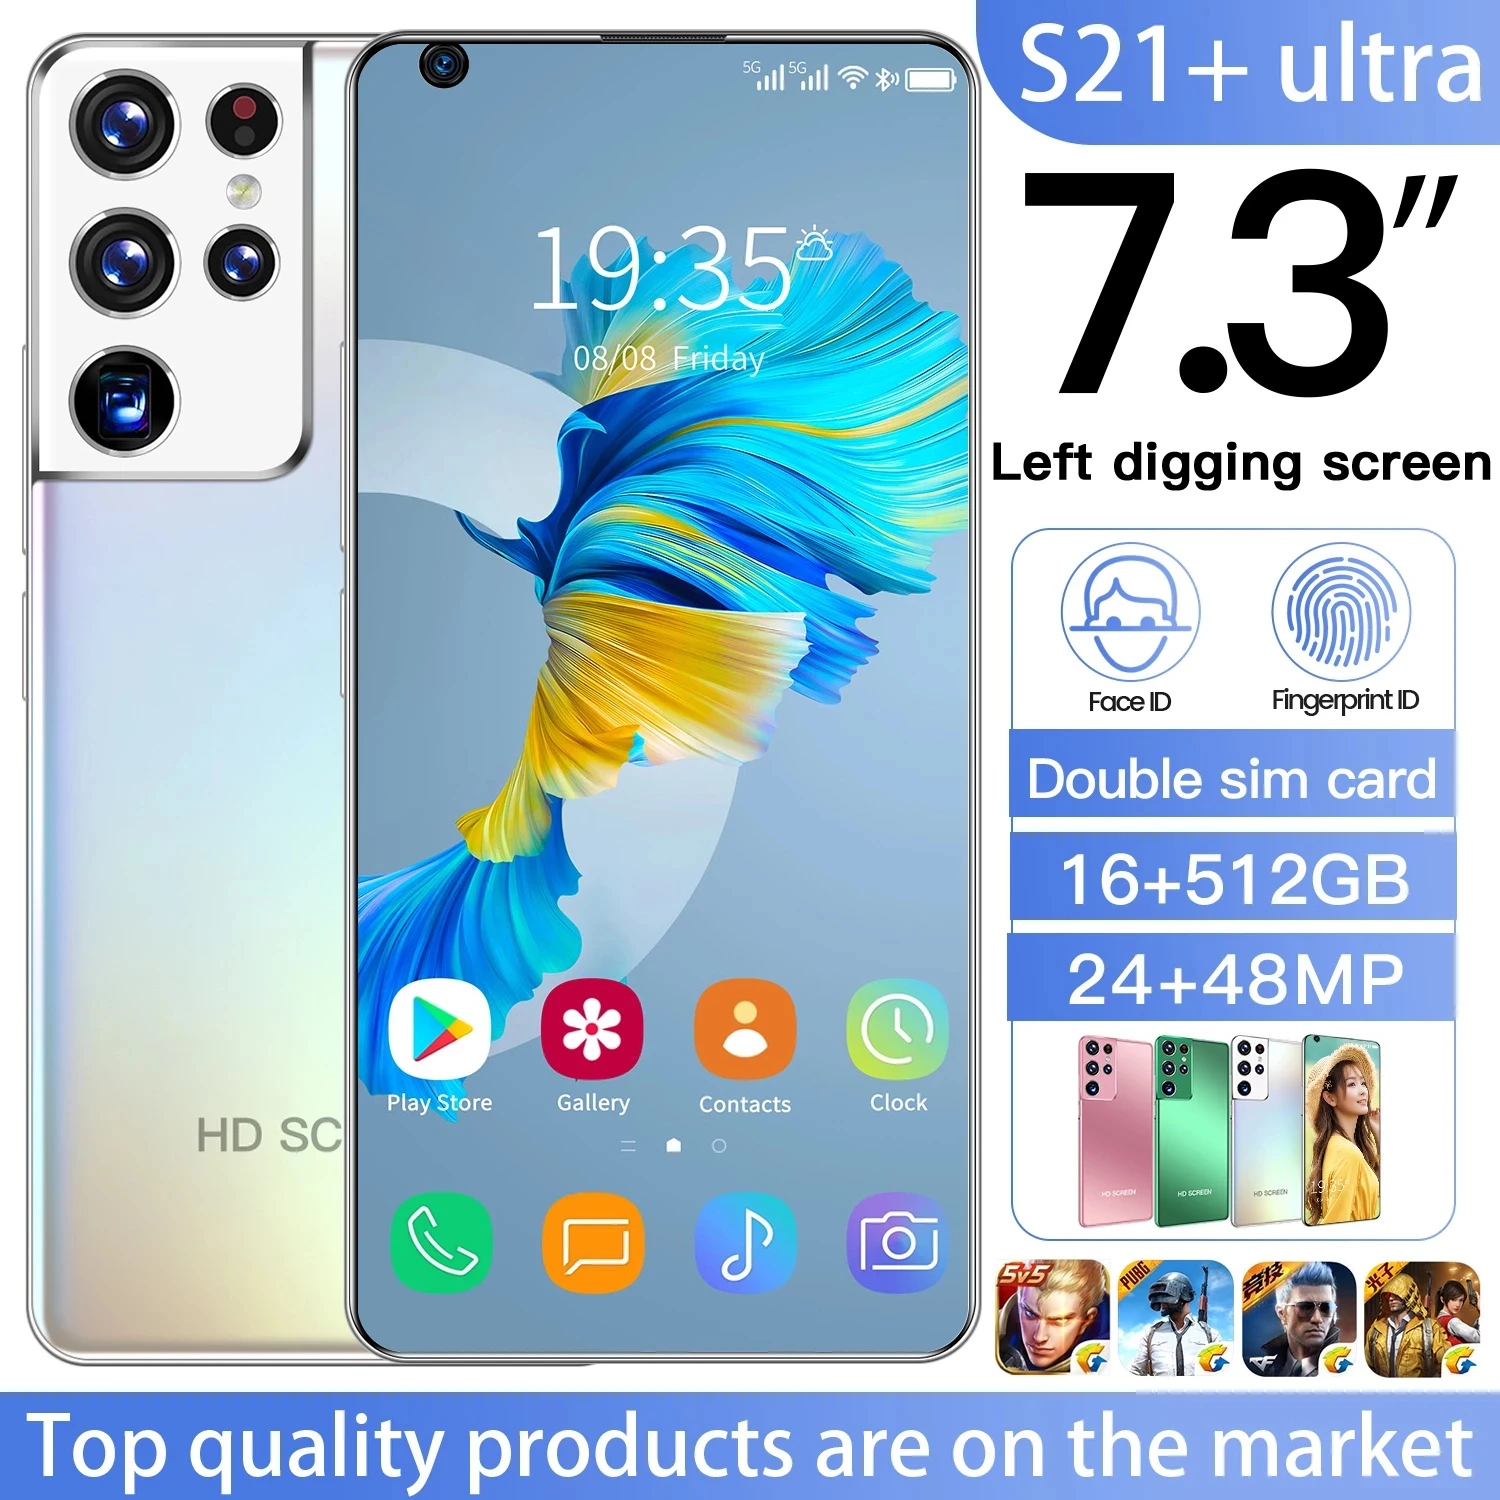 

Global Version S21+ Ultra 7.3 Inch Smart Phone Android 10.0 16GB RAM 512GB ROM Dual Sim Unlocked Mobile Phone MTK 6889 Deca Core, Gold,white,green